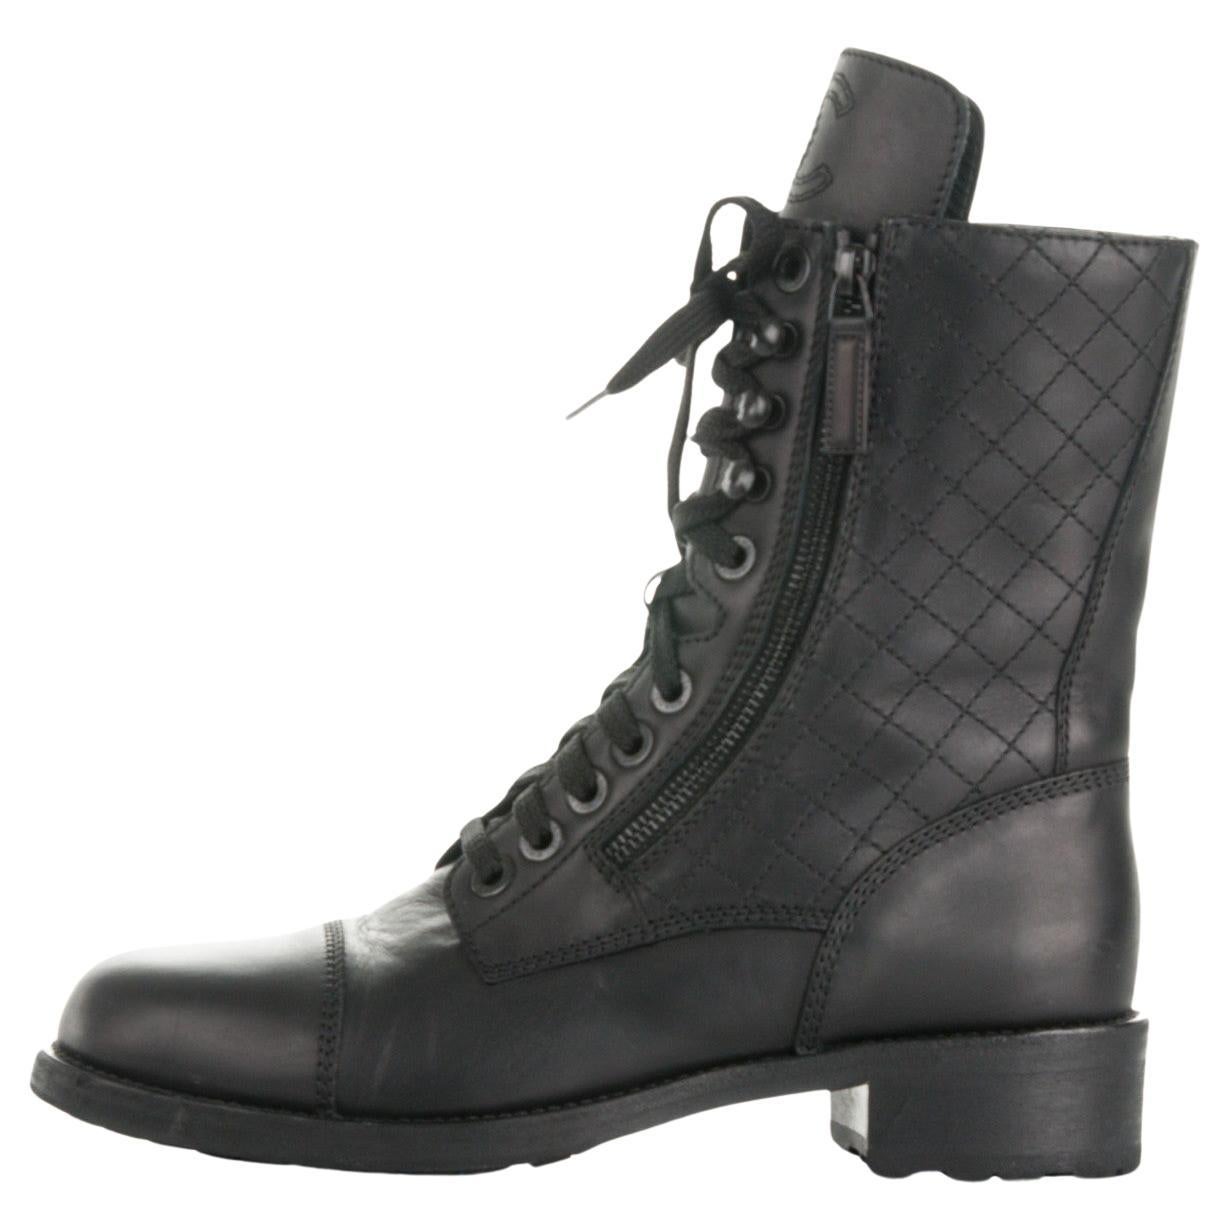 Chanel Iconic Logo Classic Calfskin Leather Diamond Stitch Combat Boots 

Size 41

Calfskin leather 
Rubber base sole
Full length laces 
CC stitched logo at the top of tonge
Quilted side panels and zippers along sides
Made in Italy

As seen on Irina